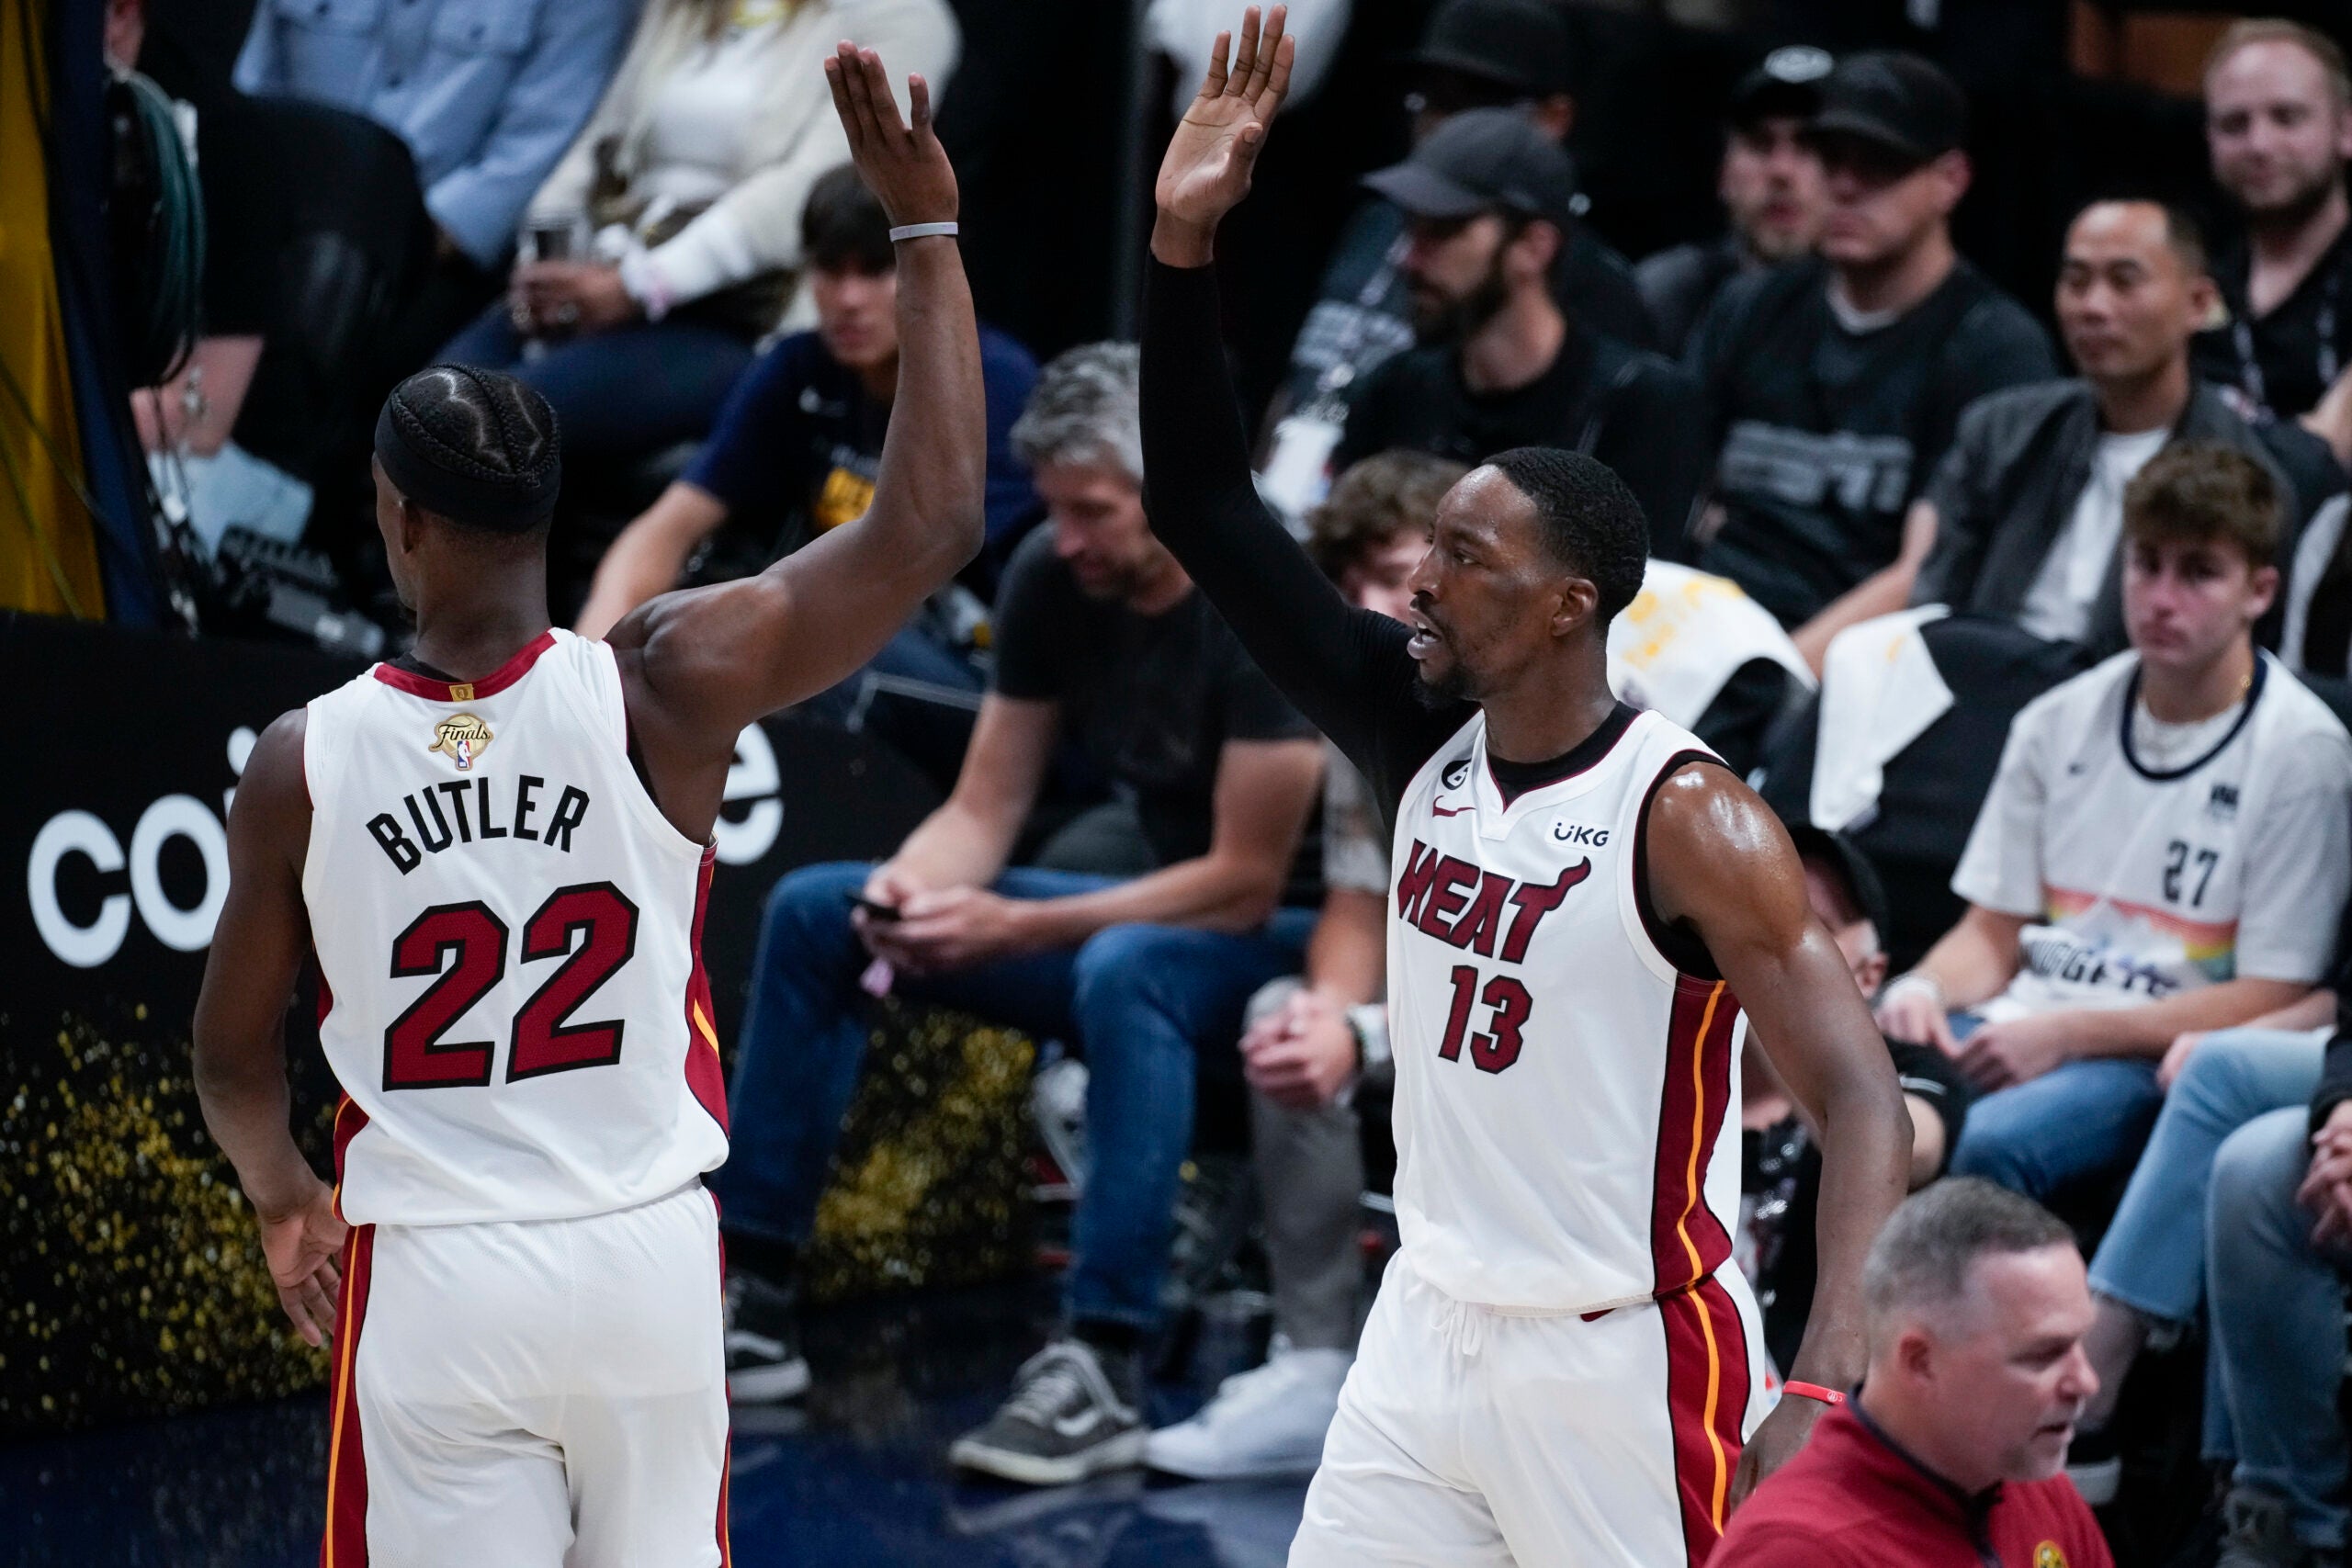 Miami Heat center Bam Adebayo, right, celebrates with forward Jimmy Butler after scoring against the Denver Nuggets during the second half of Game 2 of basketball's NBA Finals.